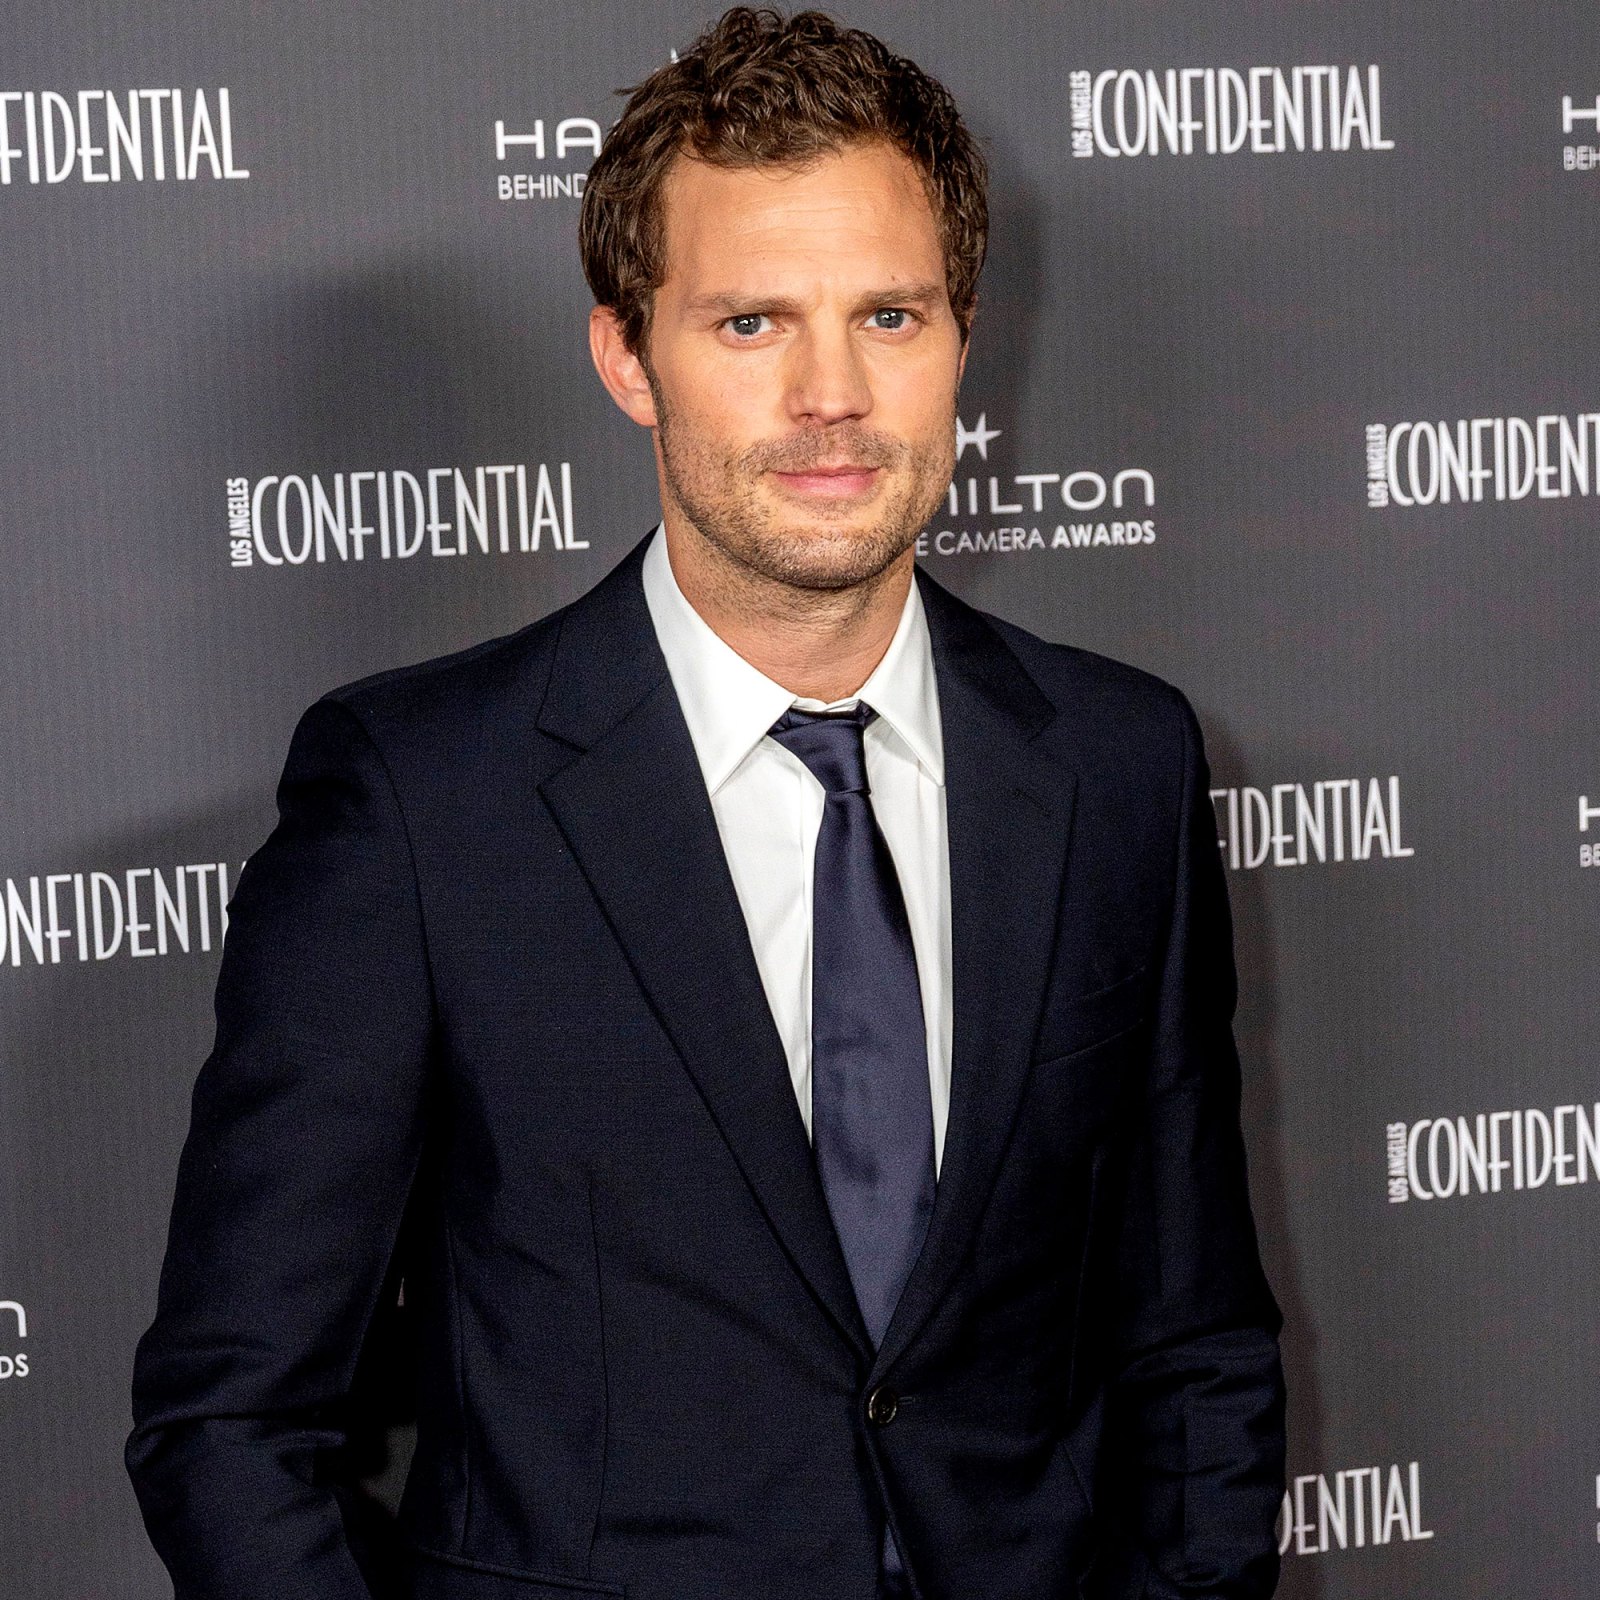 Jamie Dornan: 2021 Was the "Worst Year of My Life' After Dad's COVID Death